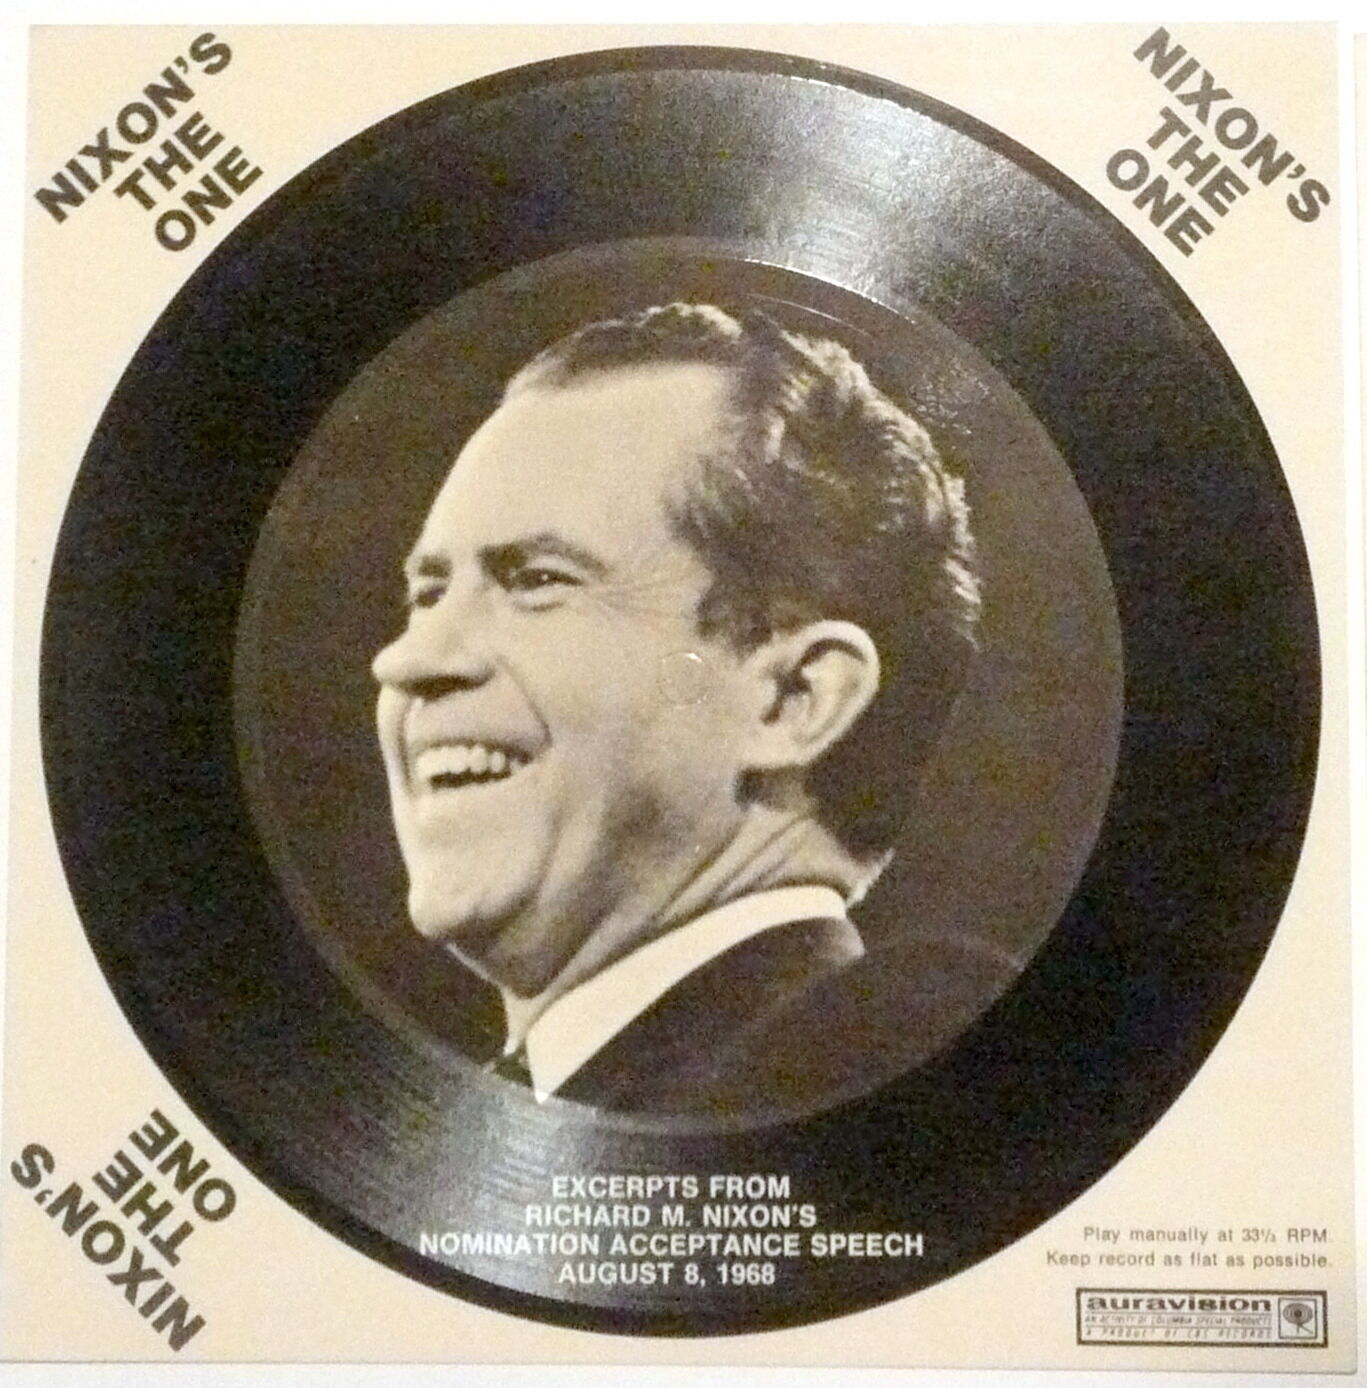 33 rpm record NEVER PLAYED: NIXON\'S THE ONE - Nomination Acceptance AUG 8, 1968